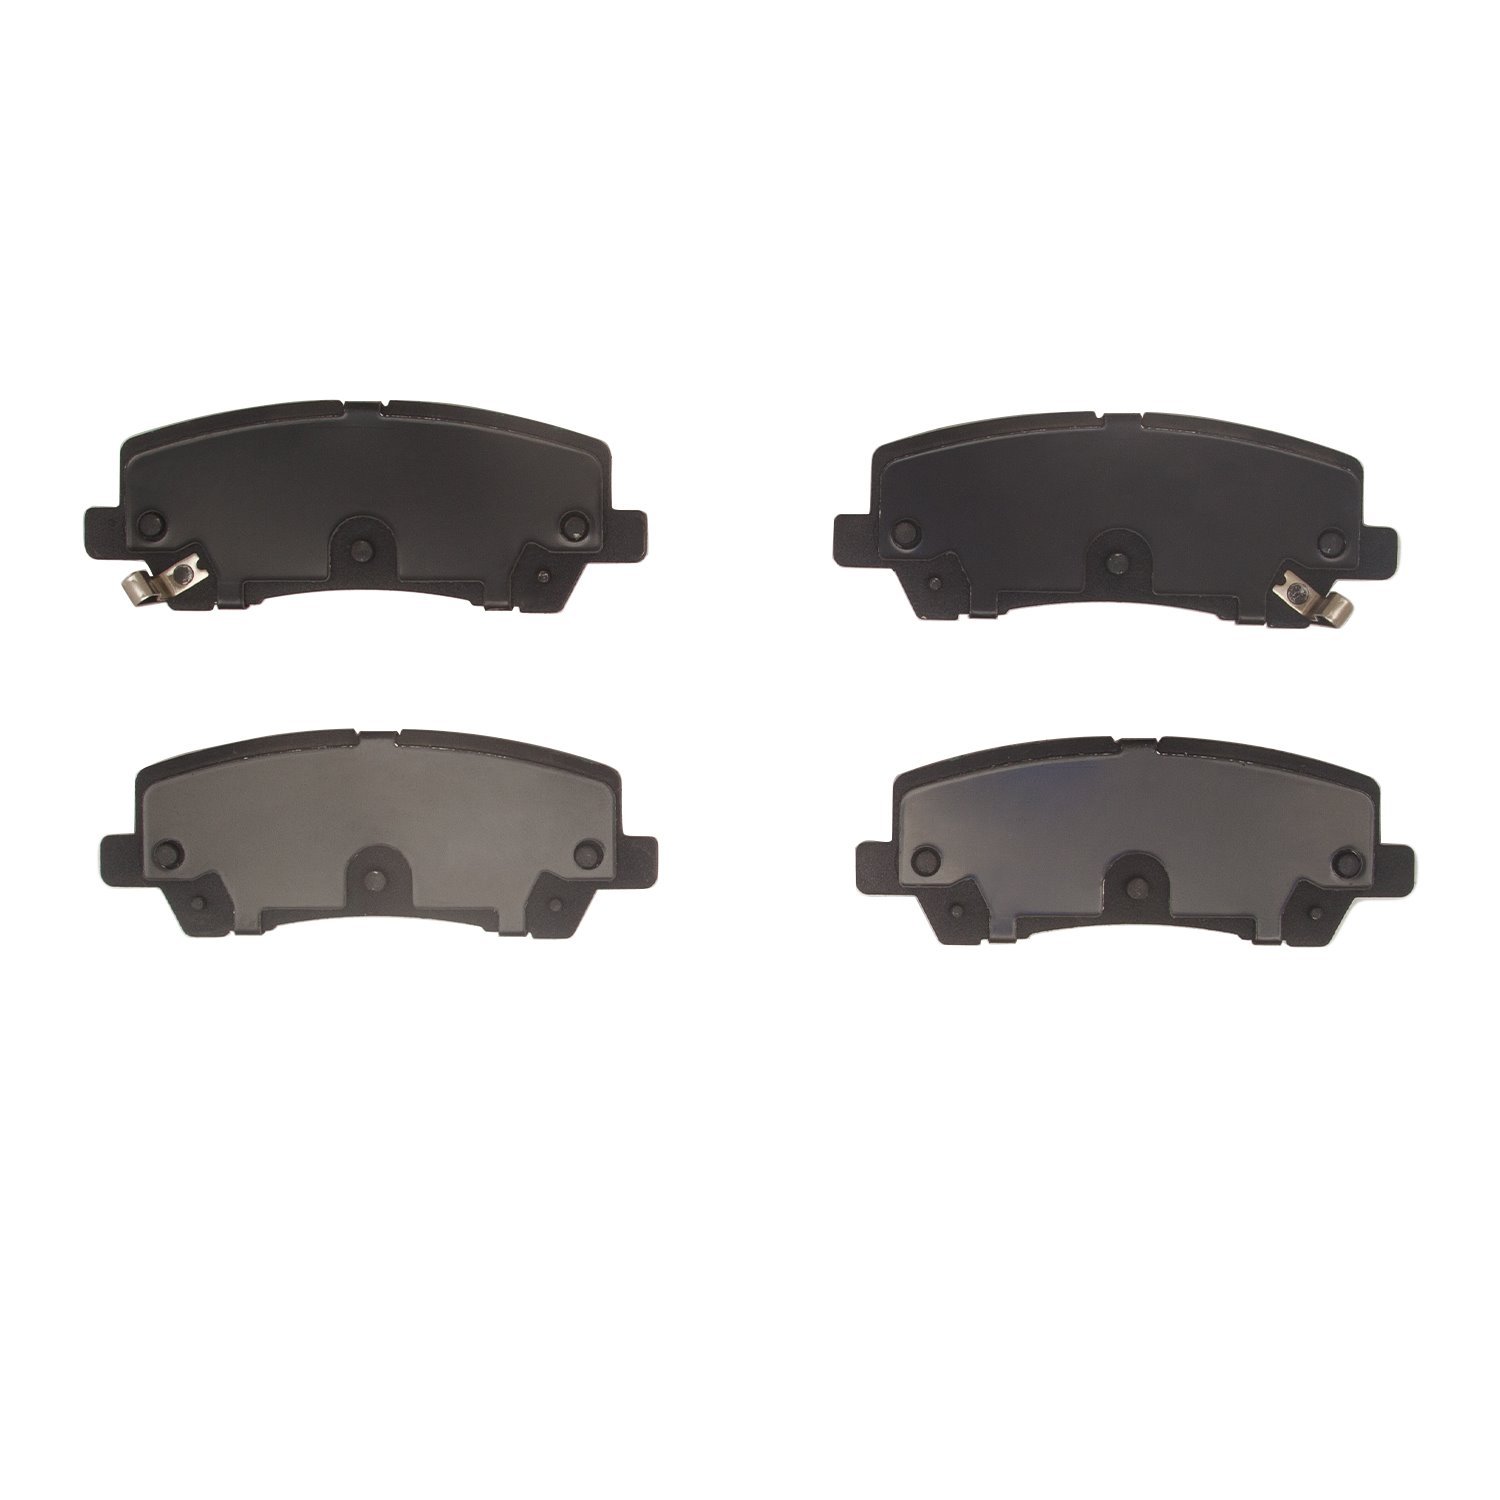 1310-2412-00 3000-Series Ceramic Brake Pads, Fits Select Ford/Lincoln/Mercury/Mazda, Position: Rear